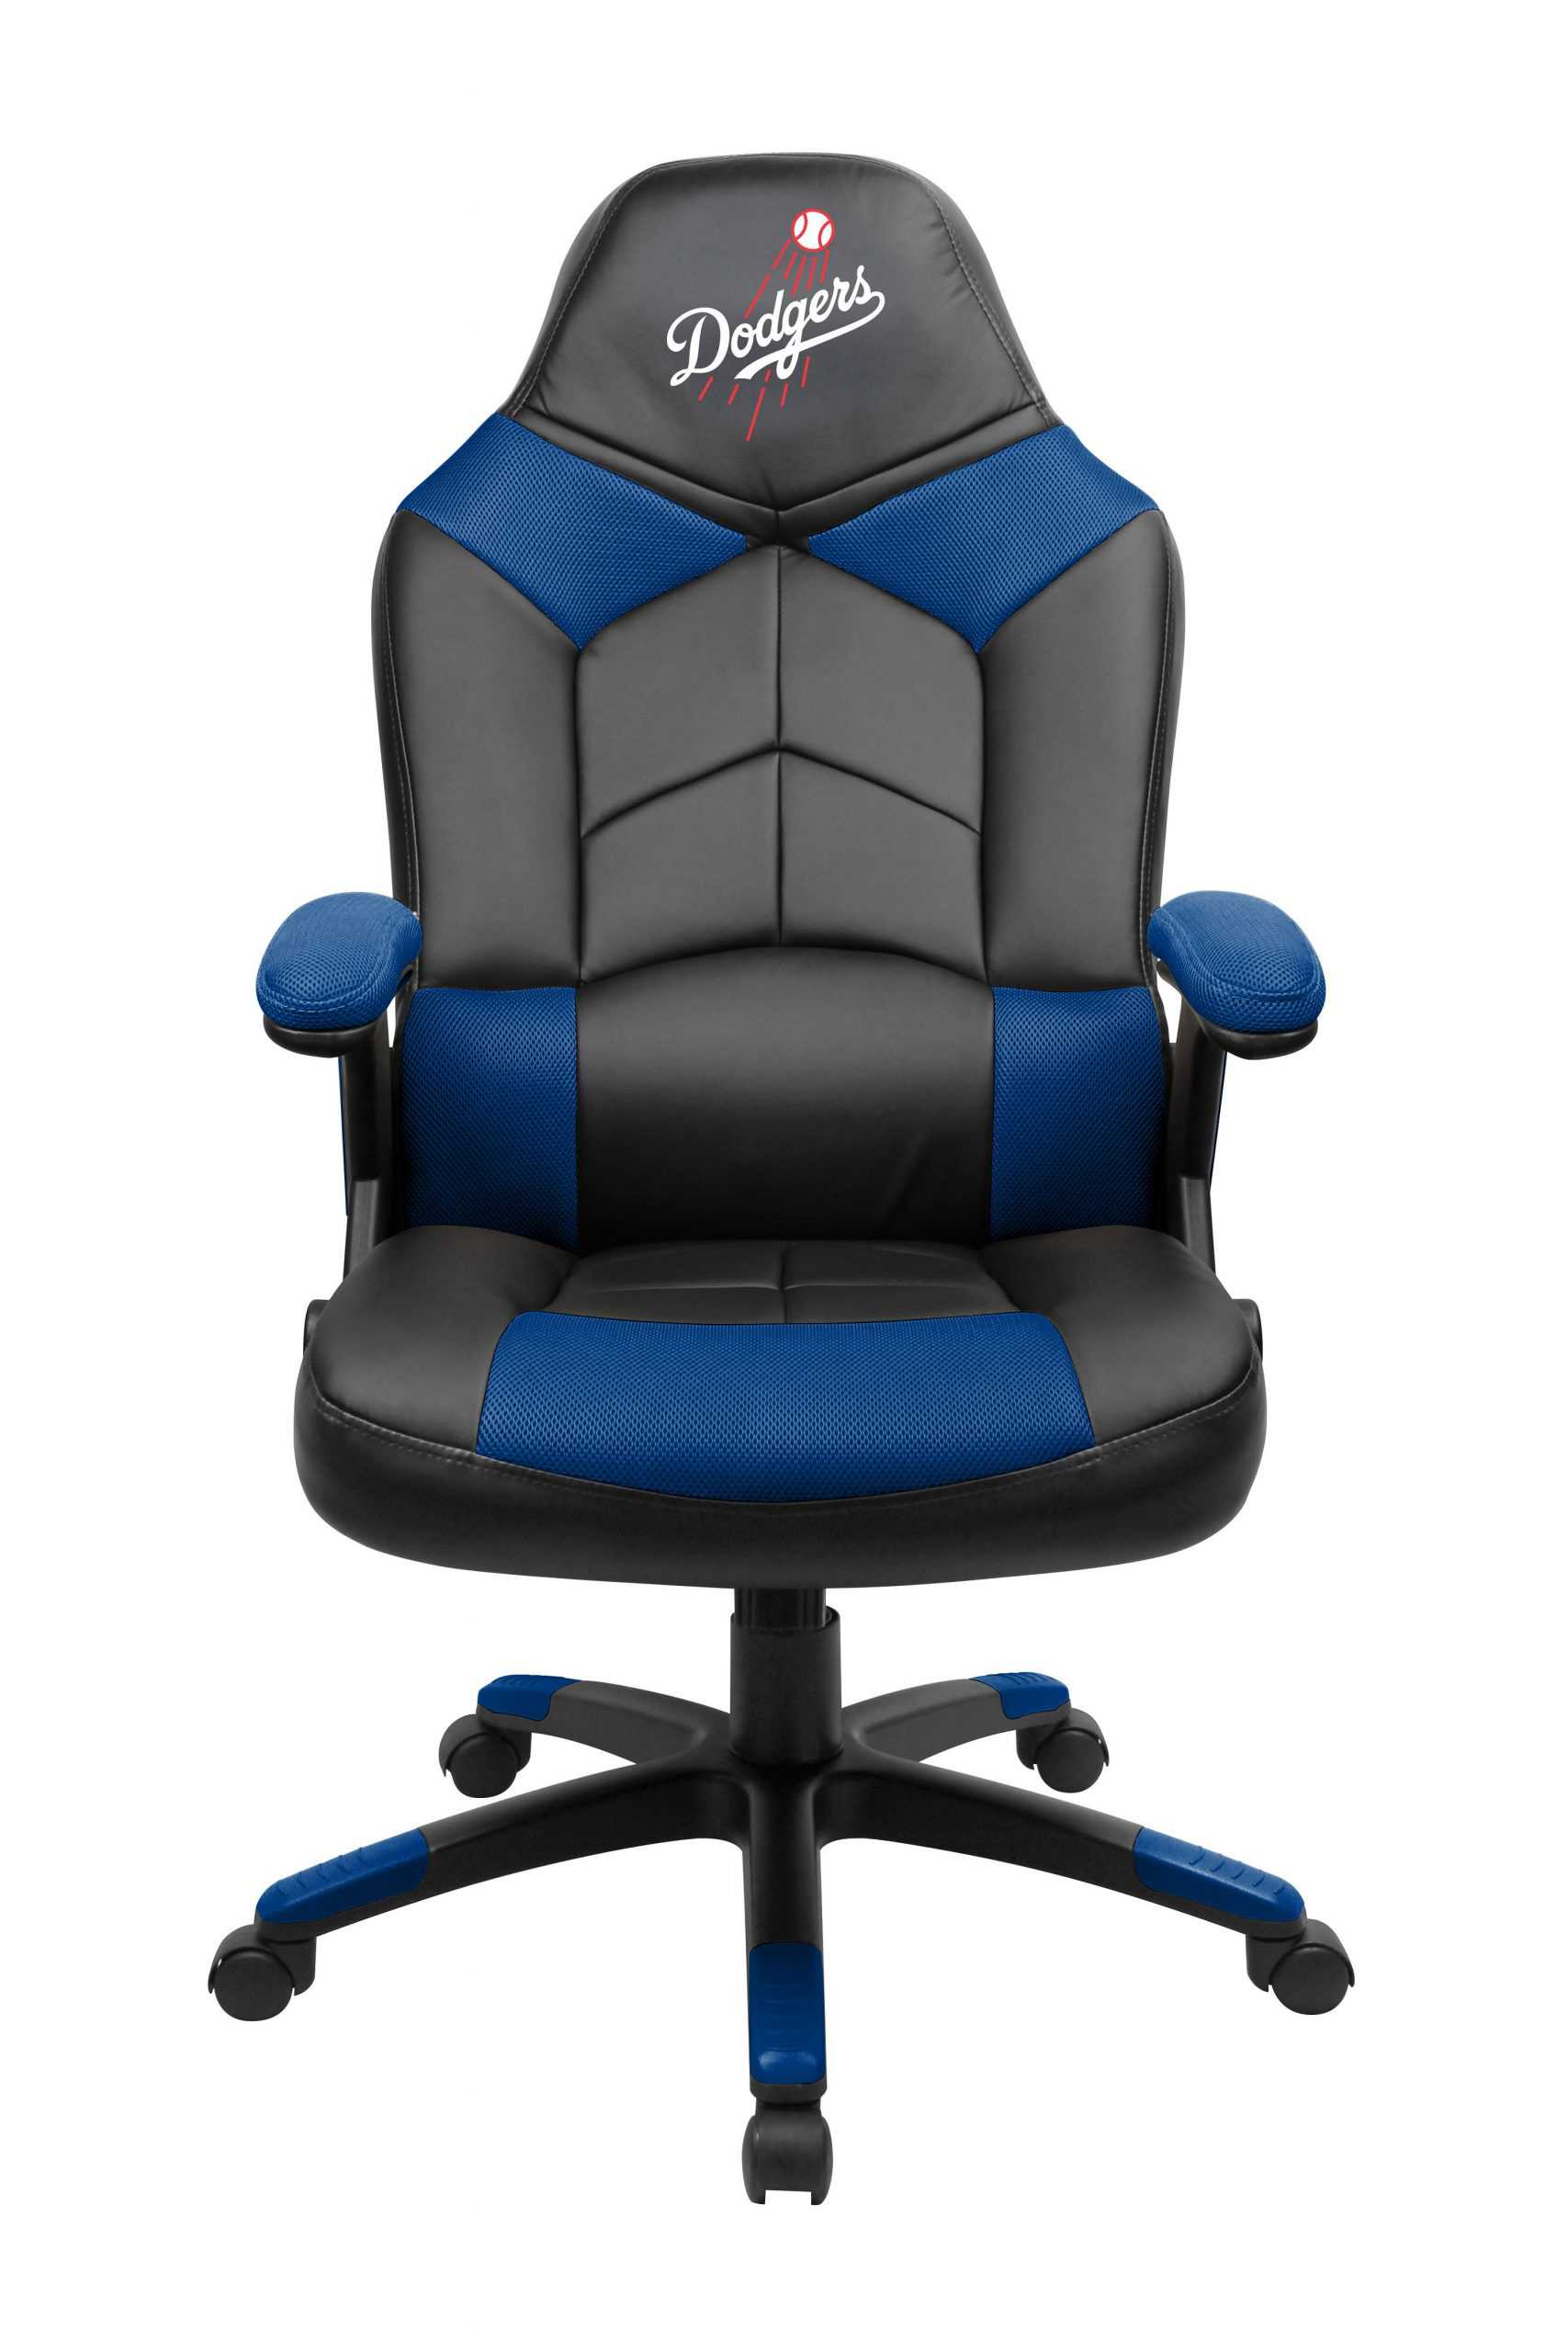 LOS ANGELES DODGERS OVERSIZED GAMING CHAIR